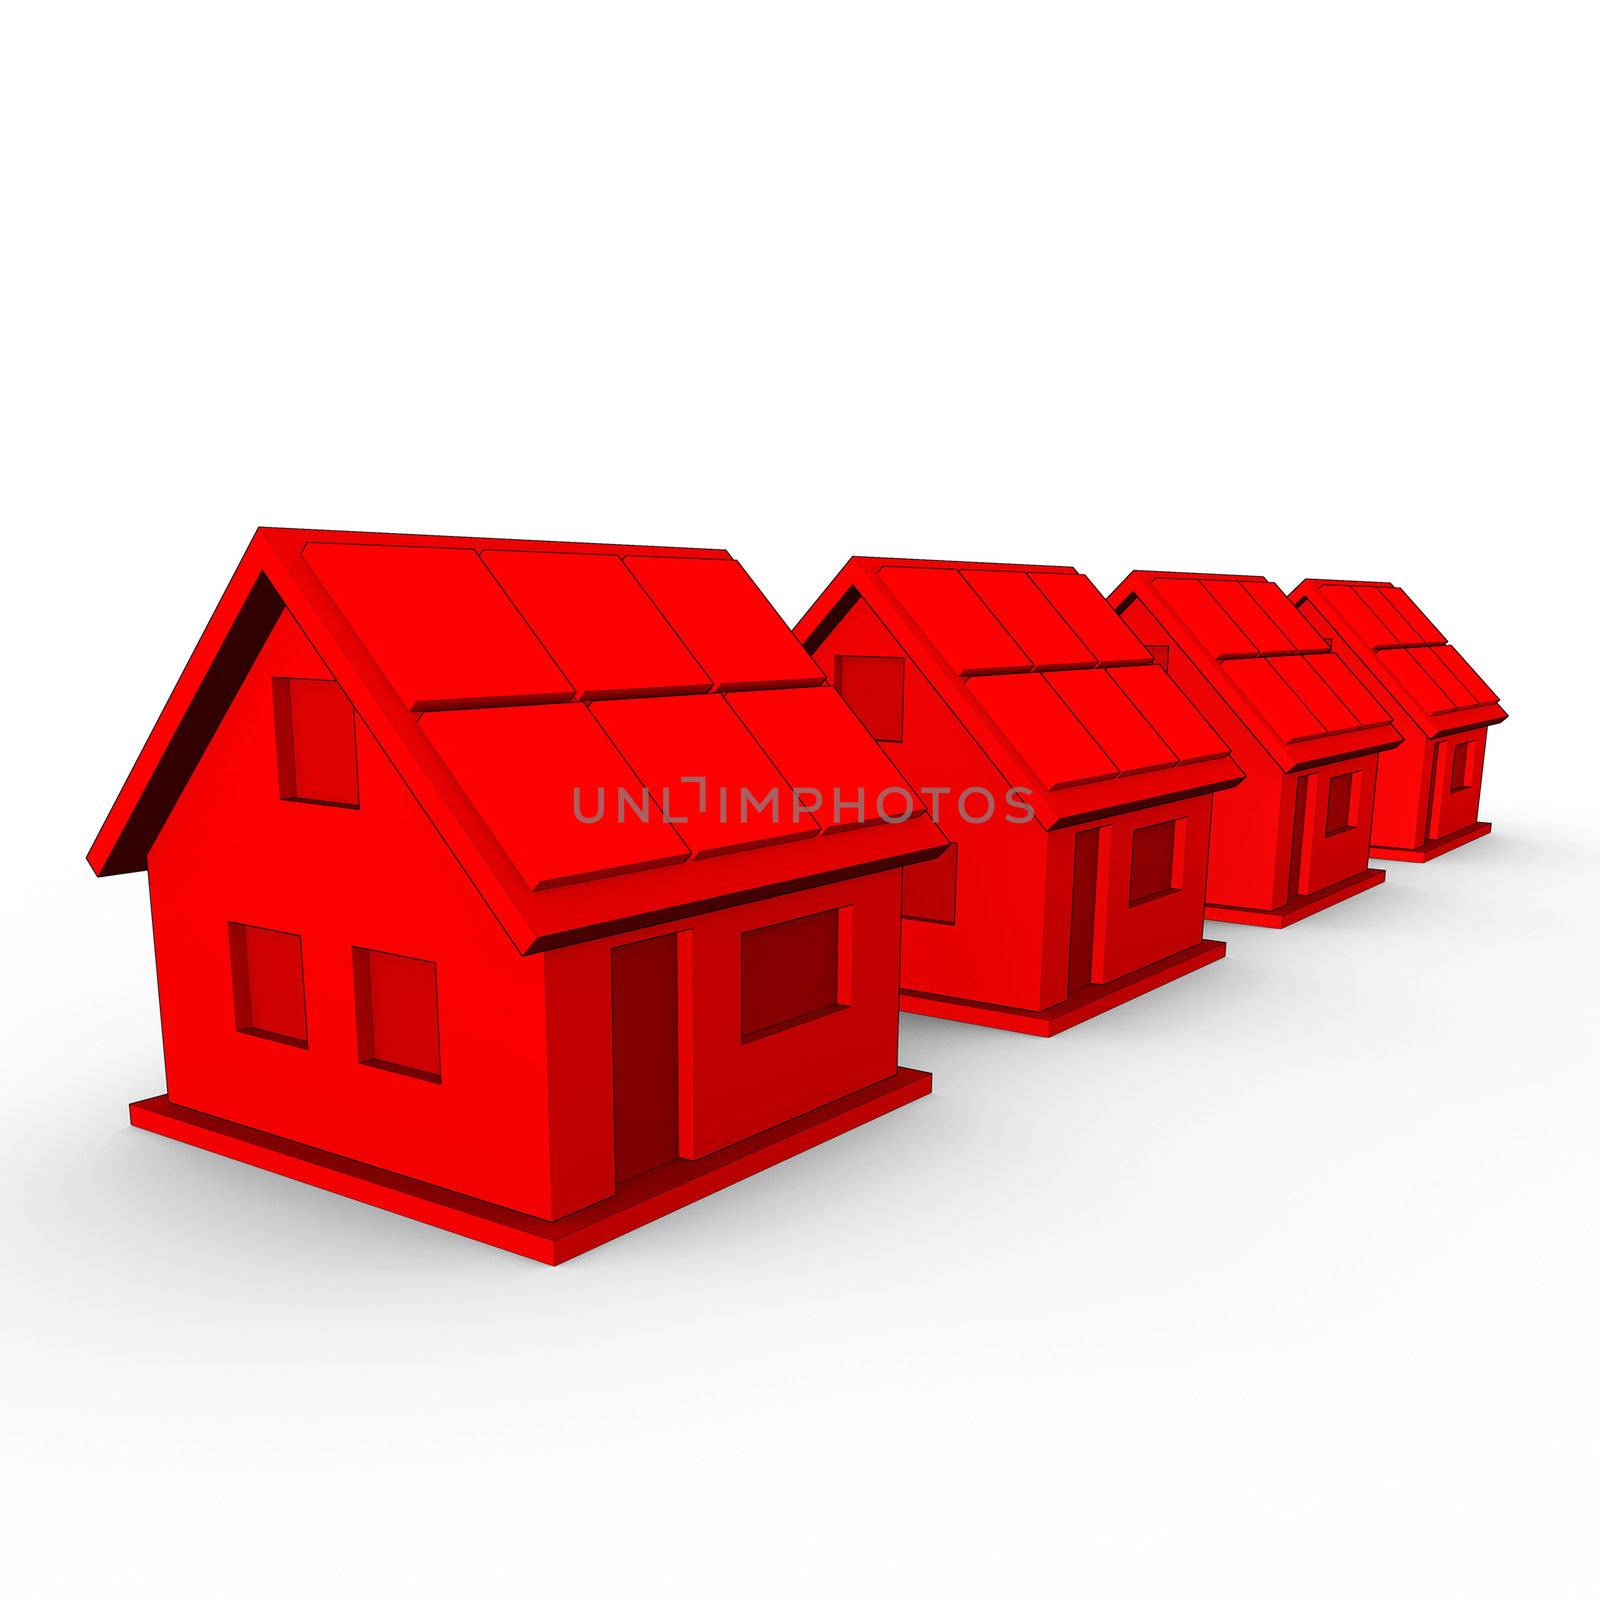 a real estate concept image of 4 red houses in a row